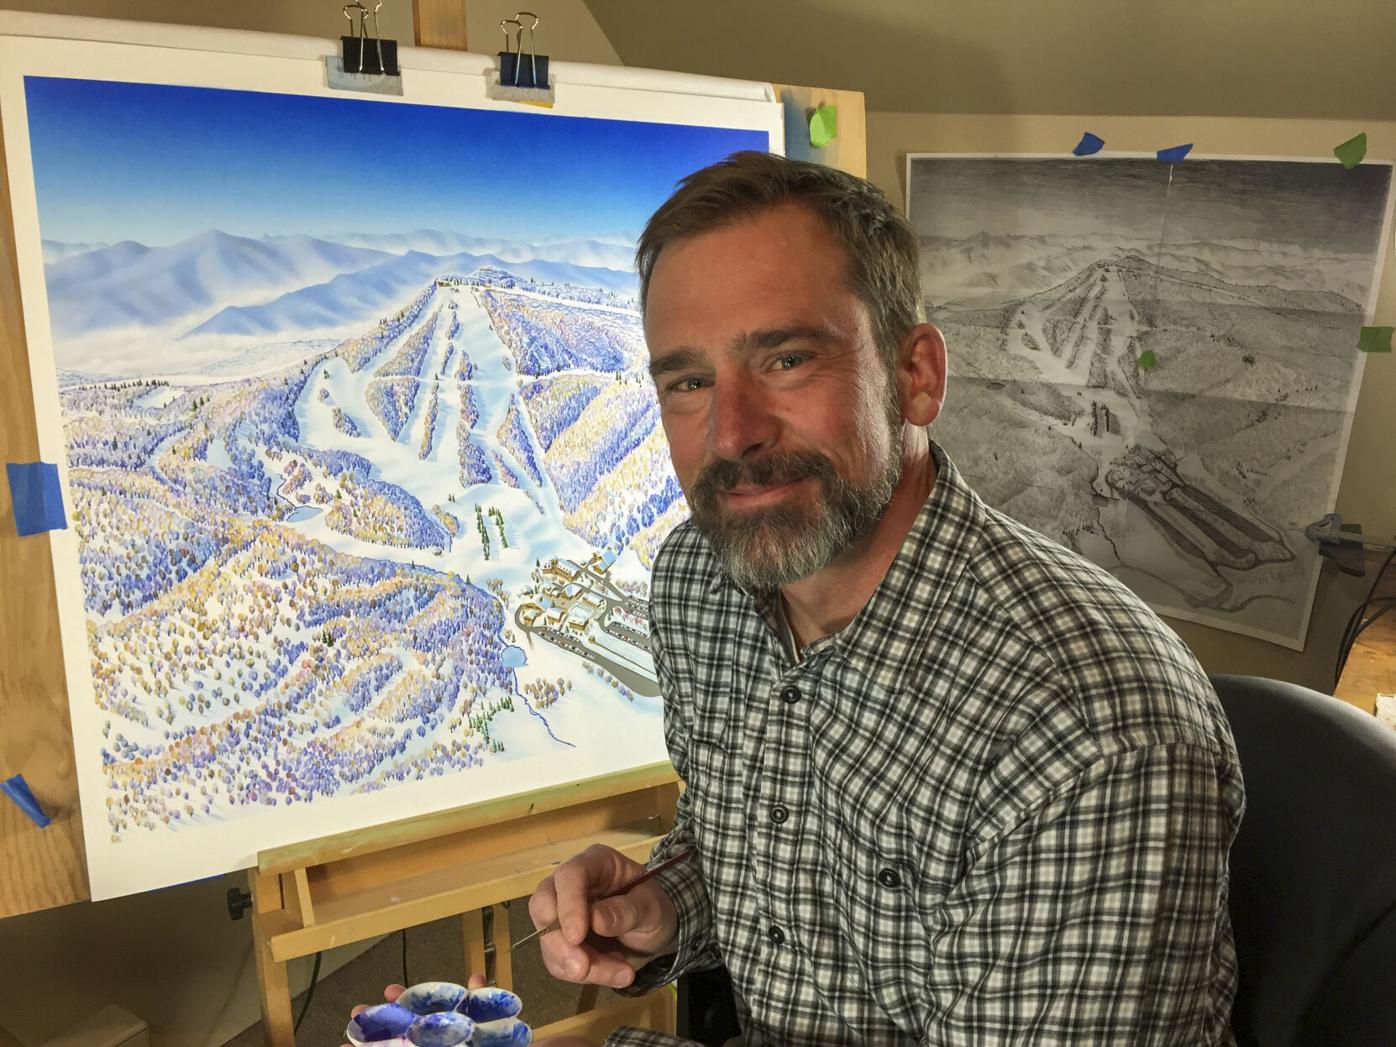 Aspen Mountain Previews New Hand-Painted Trail Map - Powder